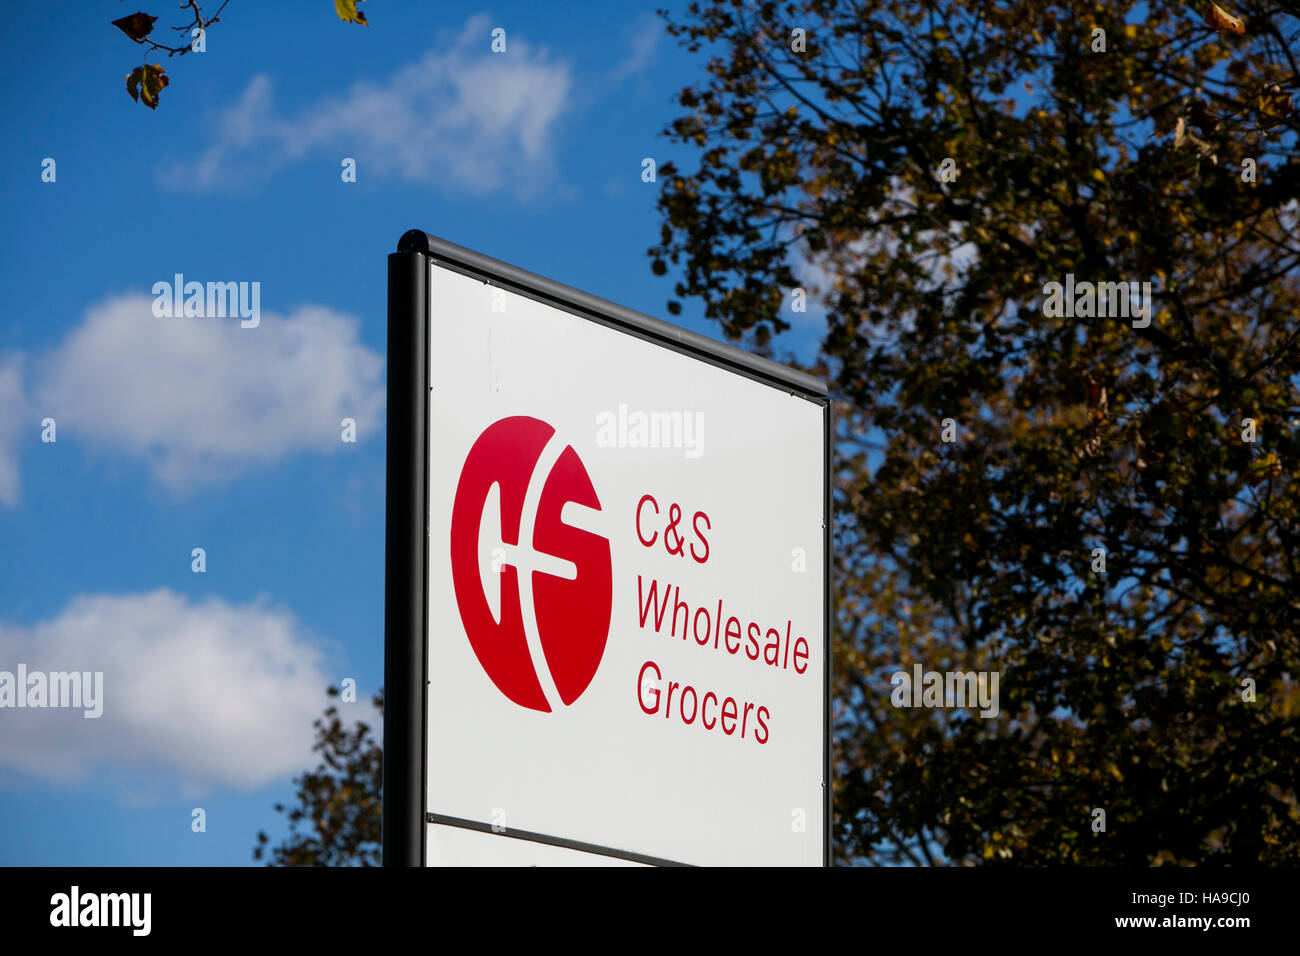 A logo sign outside of a facility occupied by C&S Wholesale Grocers in Edison, New Jersey on November 6, 2016. Stock Photo